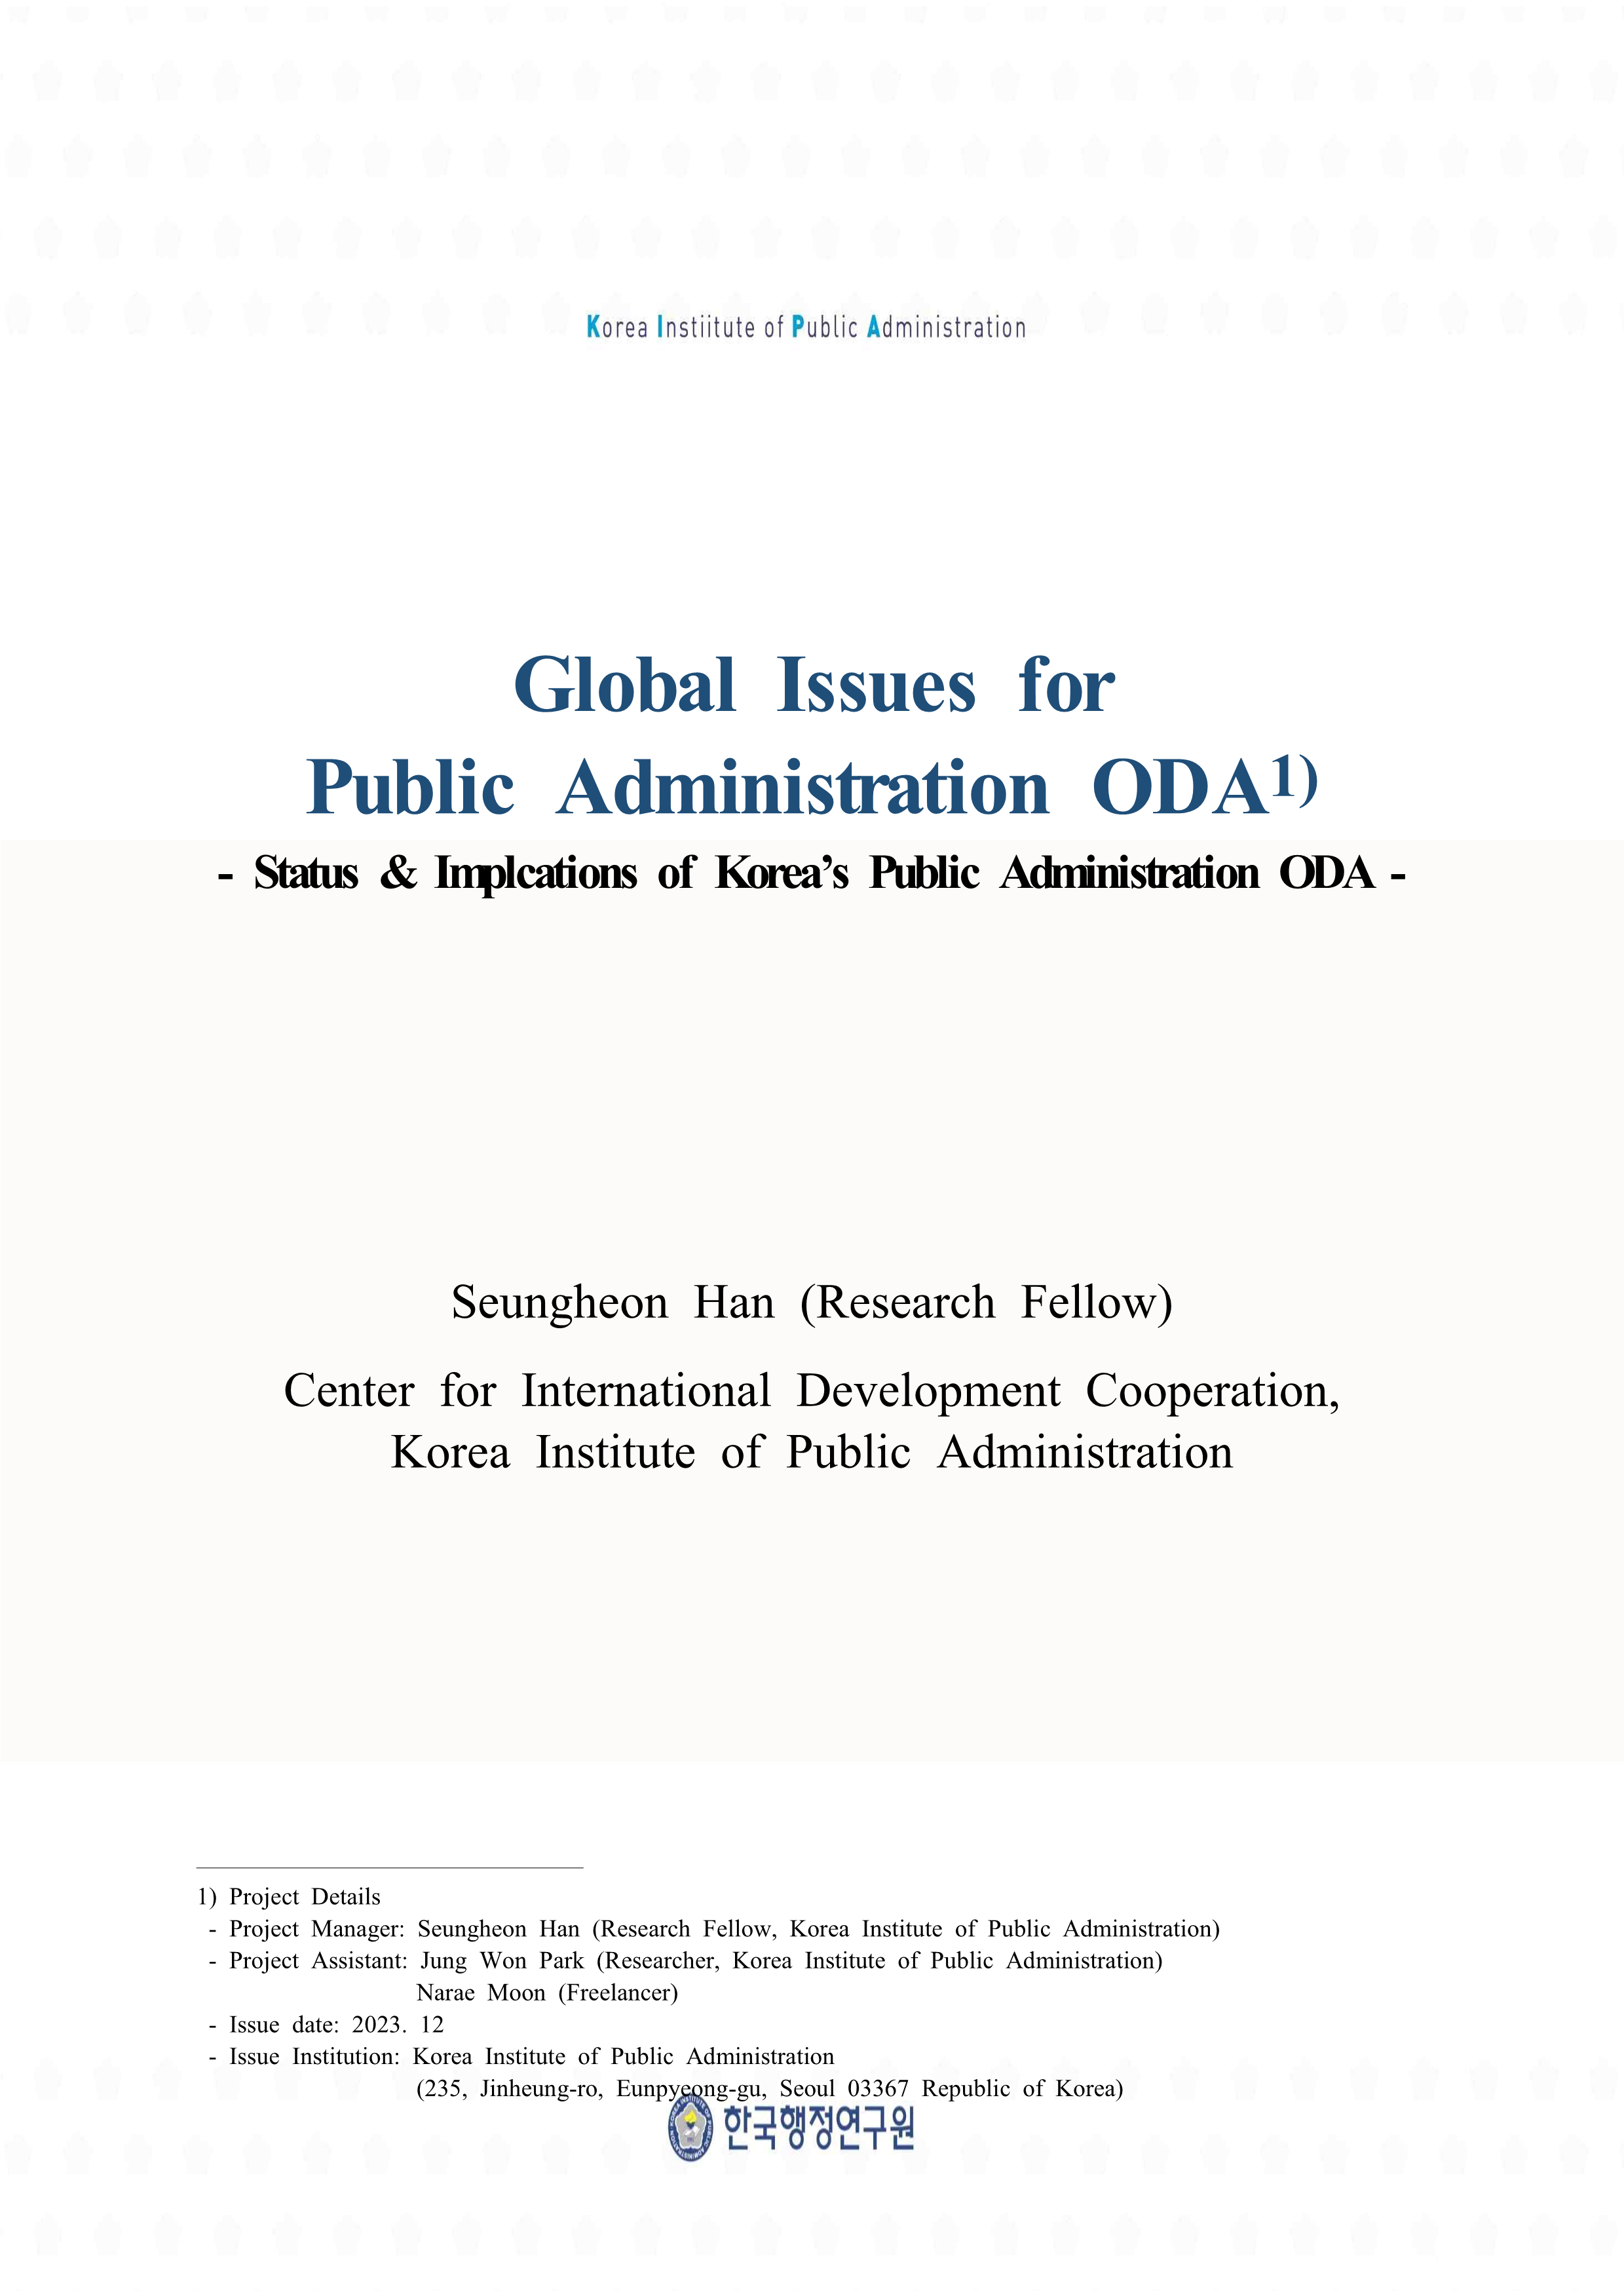 《Global Issues for Public Administration ODA_1》 Status & Implications of Korea's Public Administration ODA